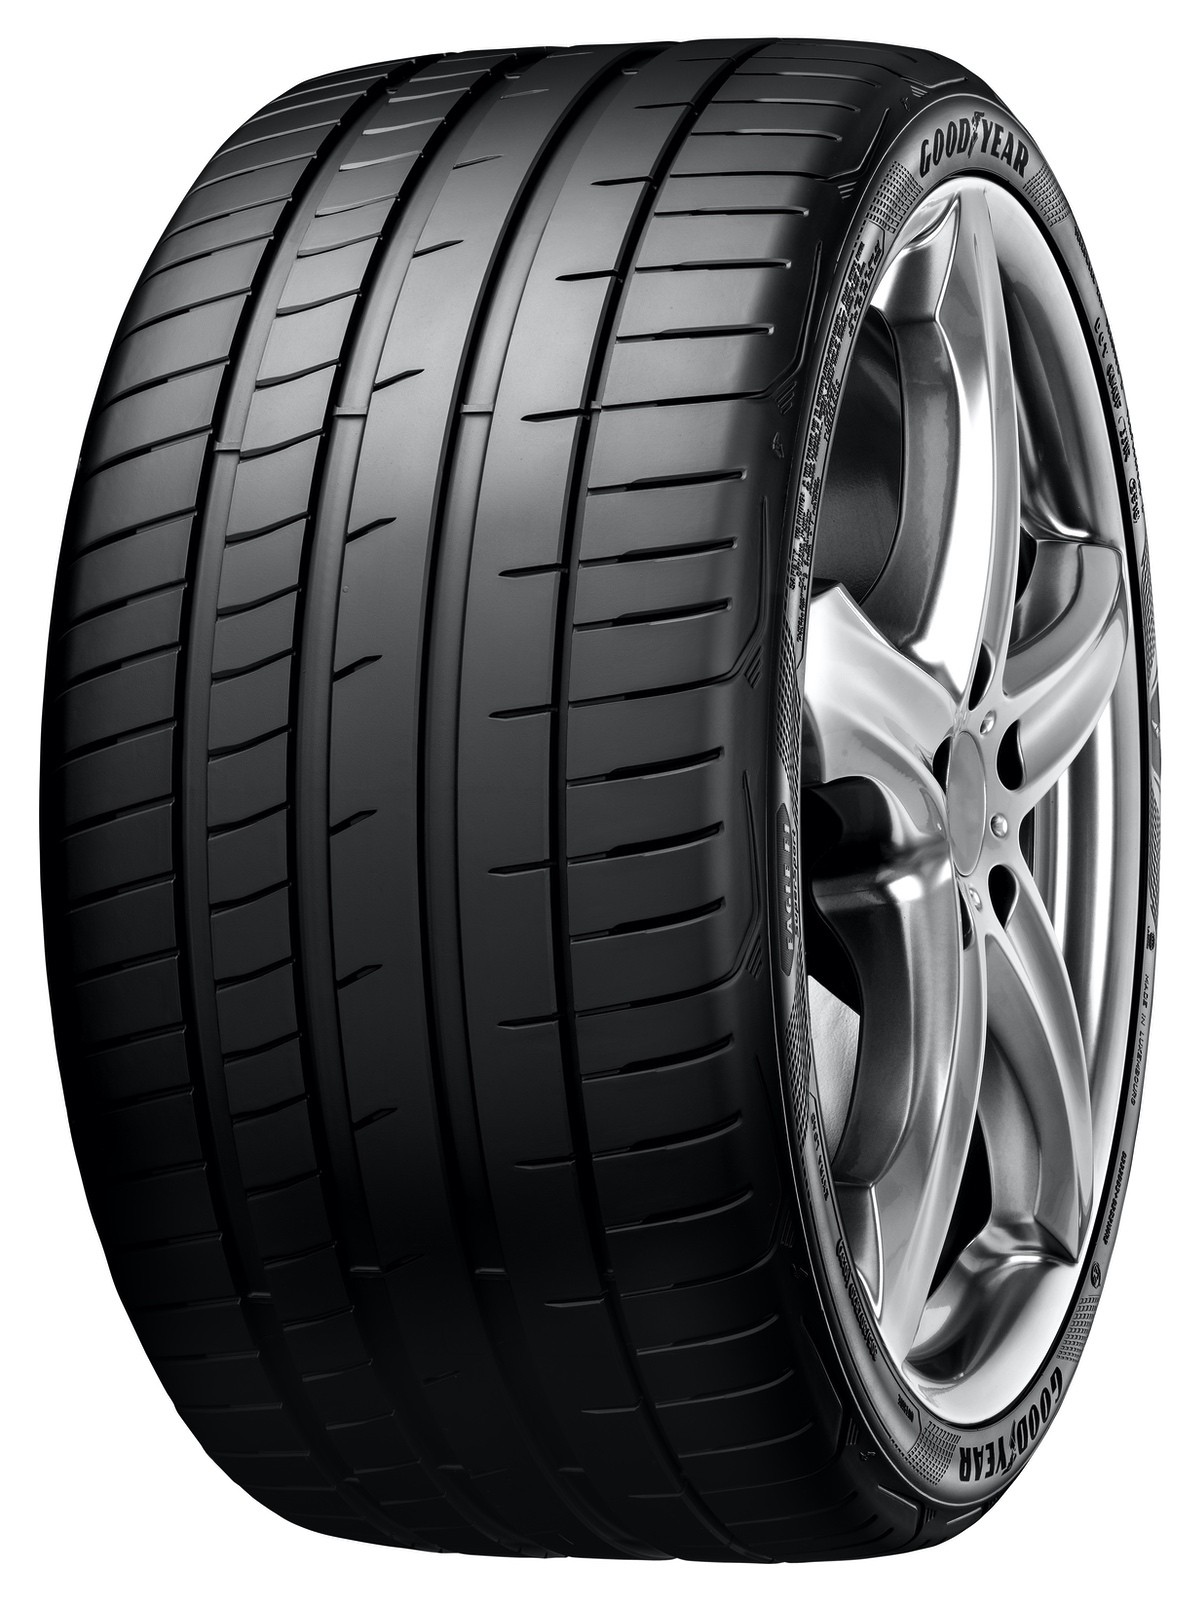 Gomme Nuove Goodyear 235/40 R18 95Y EA F1 SUPERSPORT FP XL pneumatici nuovi Estivo